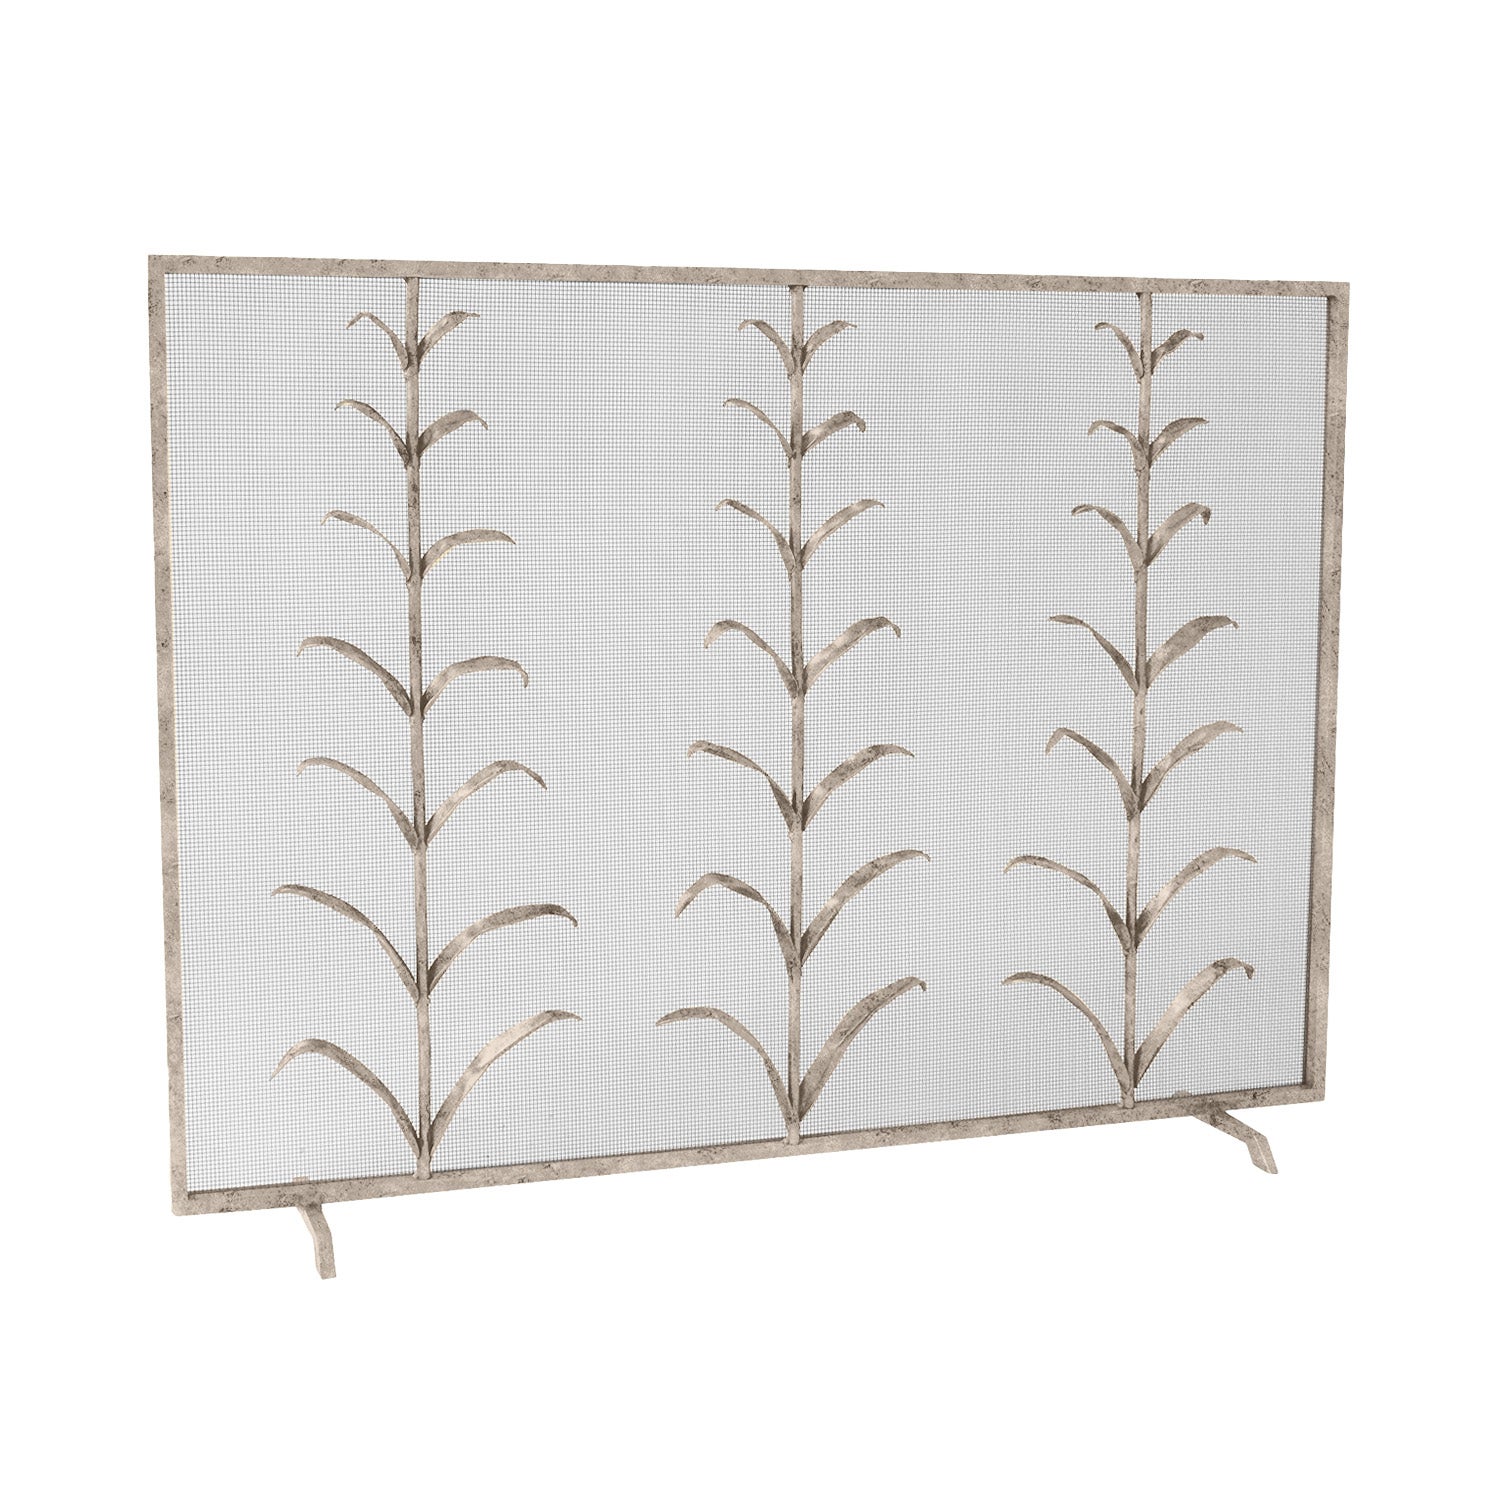 Lily Stems Fireplace Screen in Aged Silver For Sale